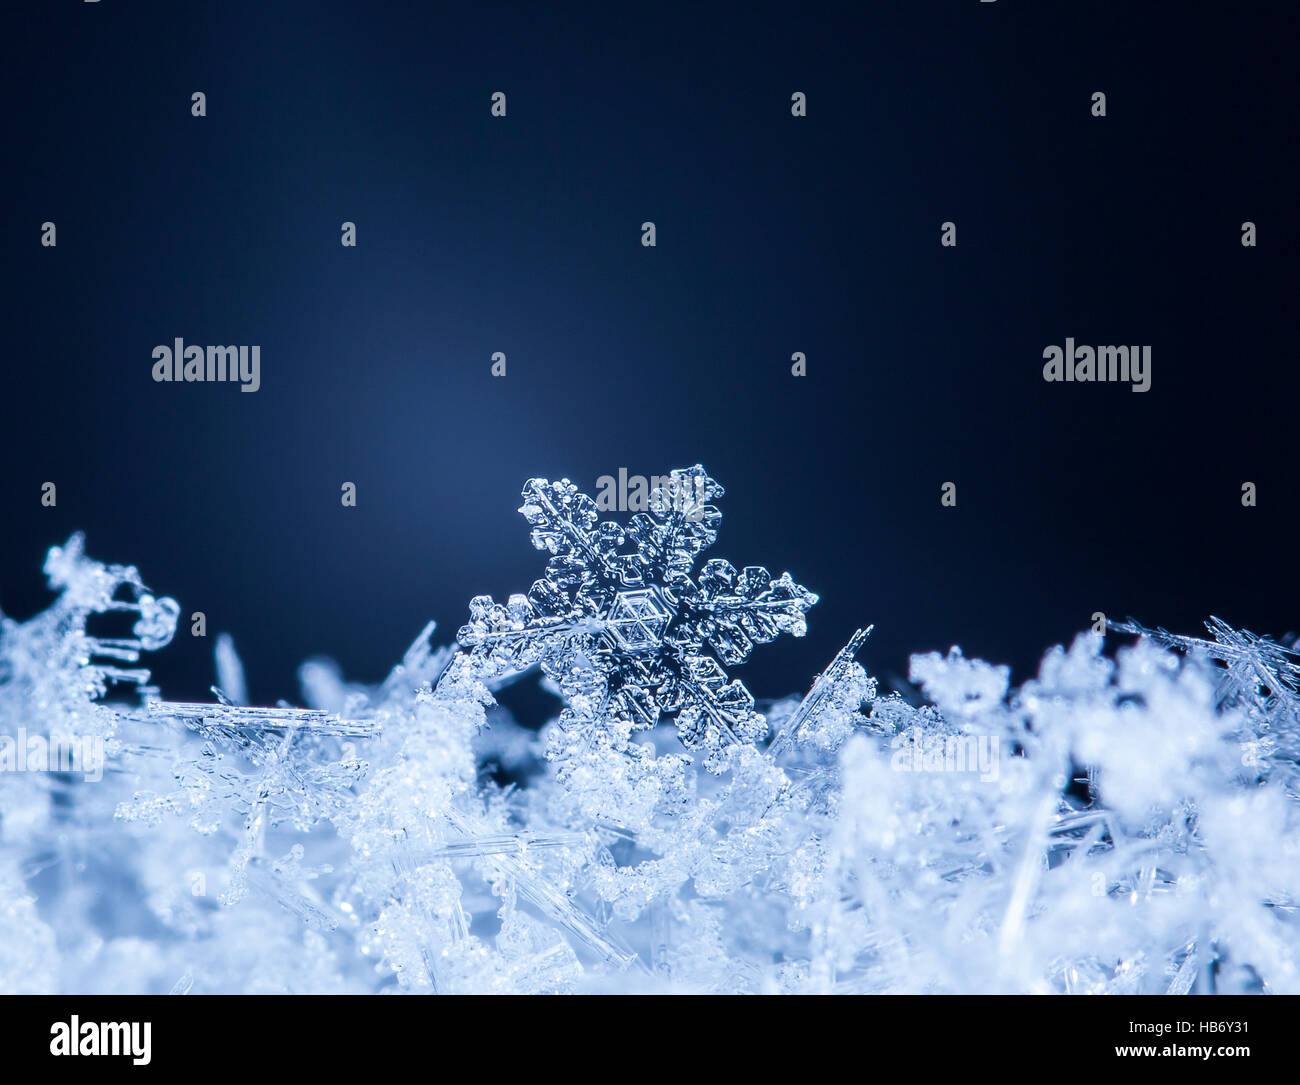 Artificial Snowflakes in Snow Close-up Stock Photo - Image of